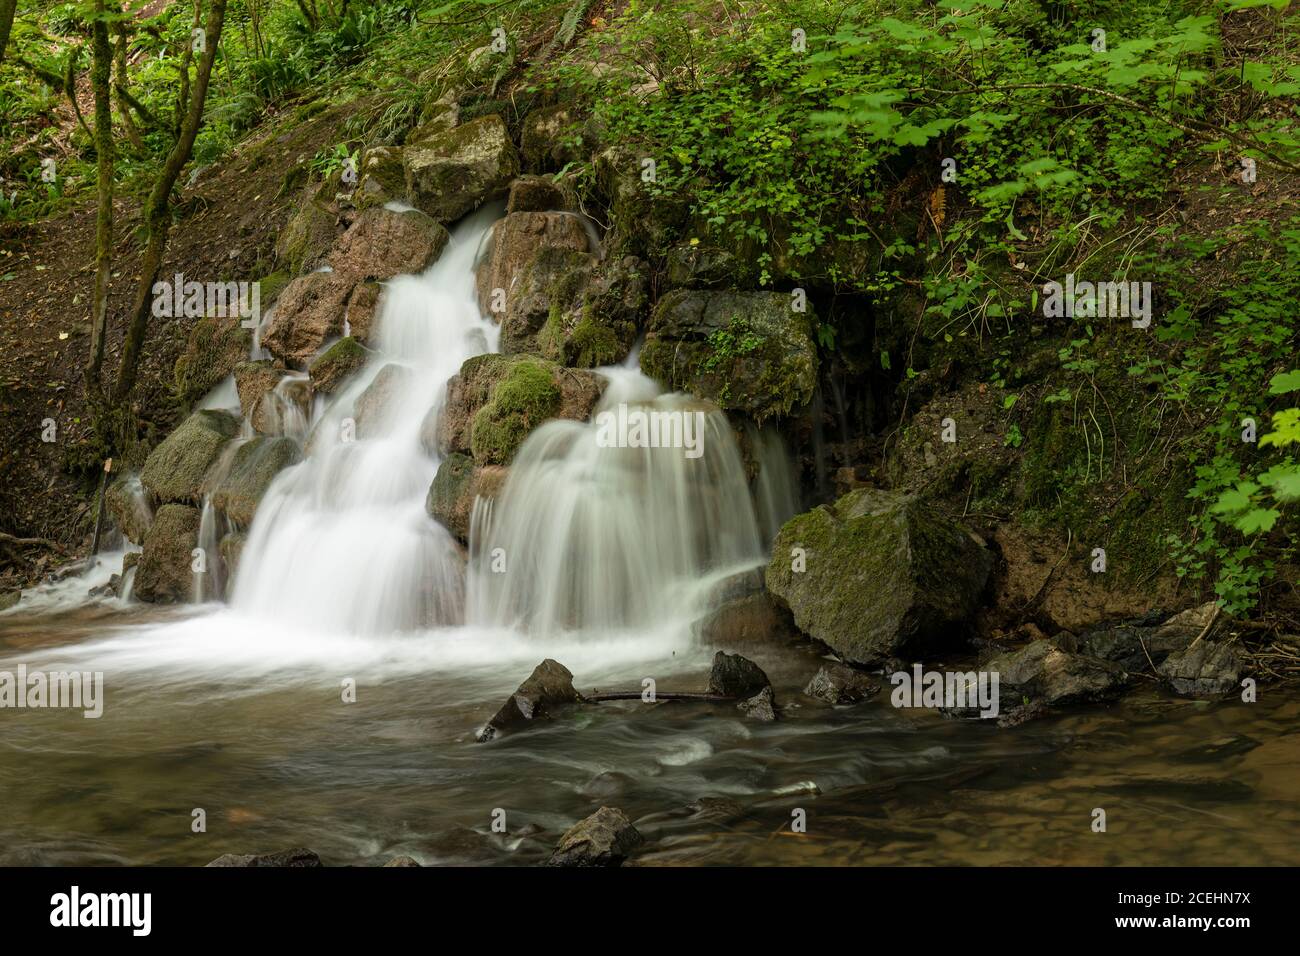 Waterfall at the Old Fussells Iron Works, Mells, Somerset, England, UK Stock Photo